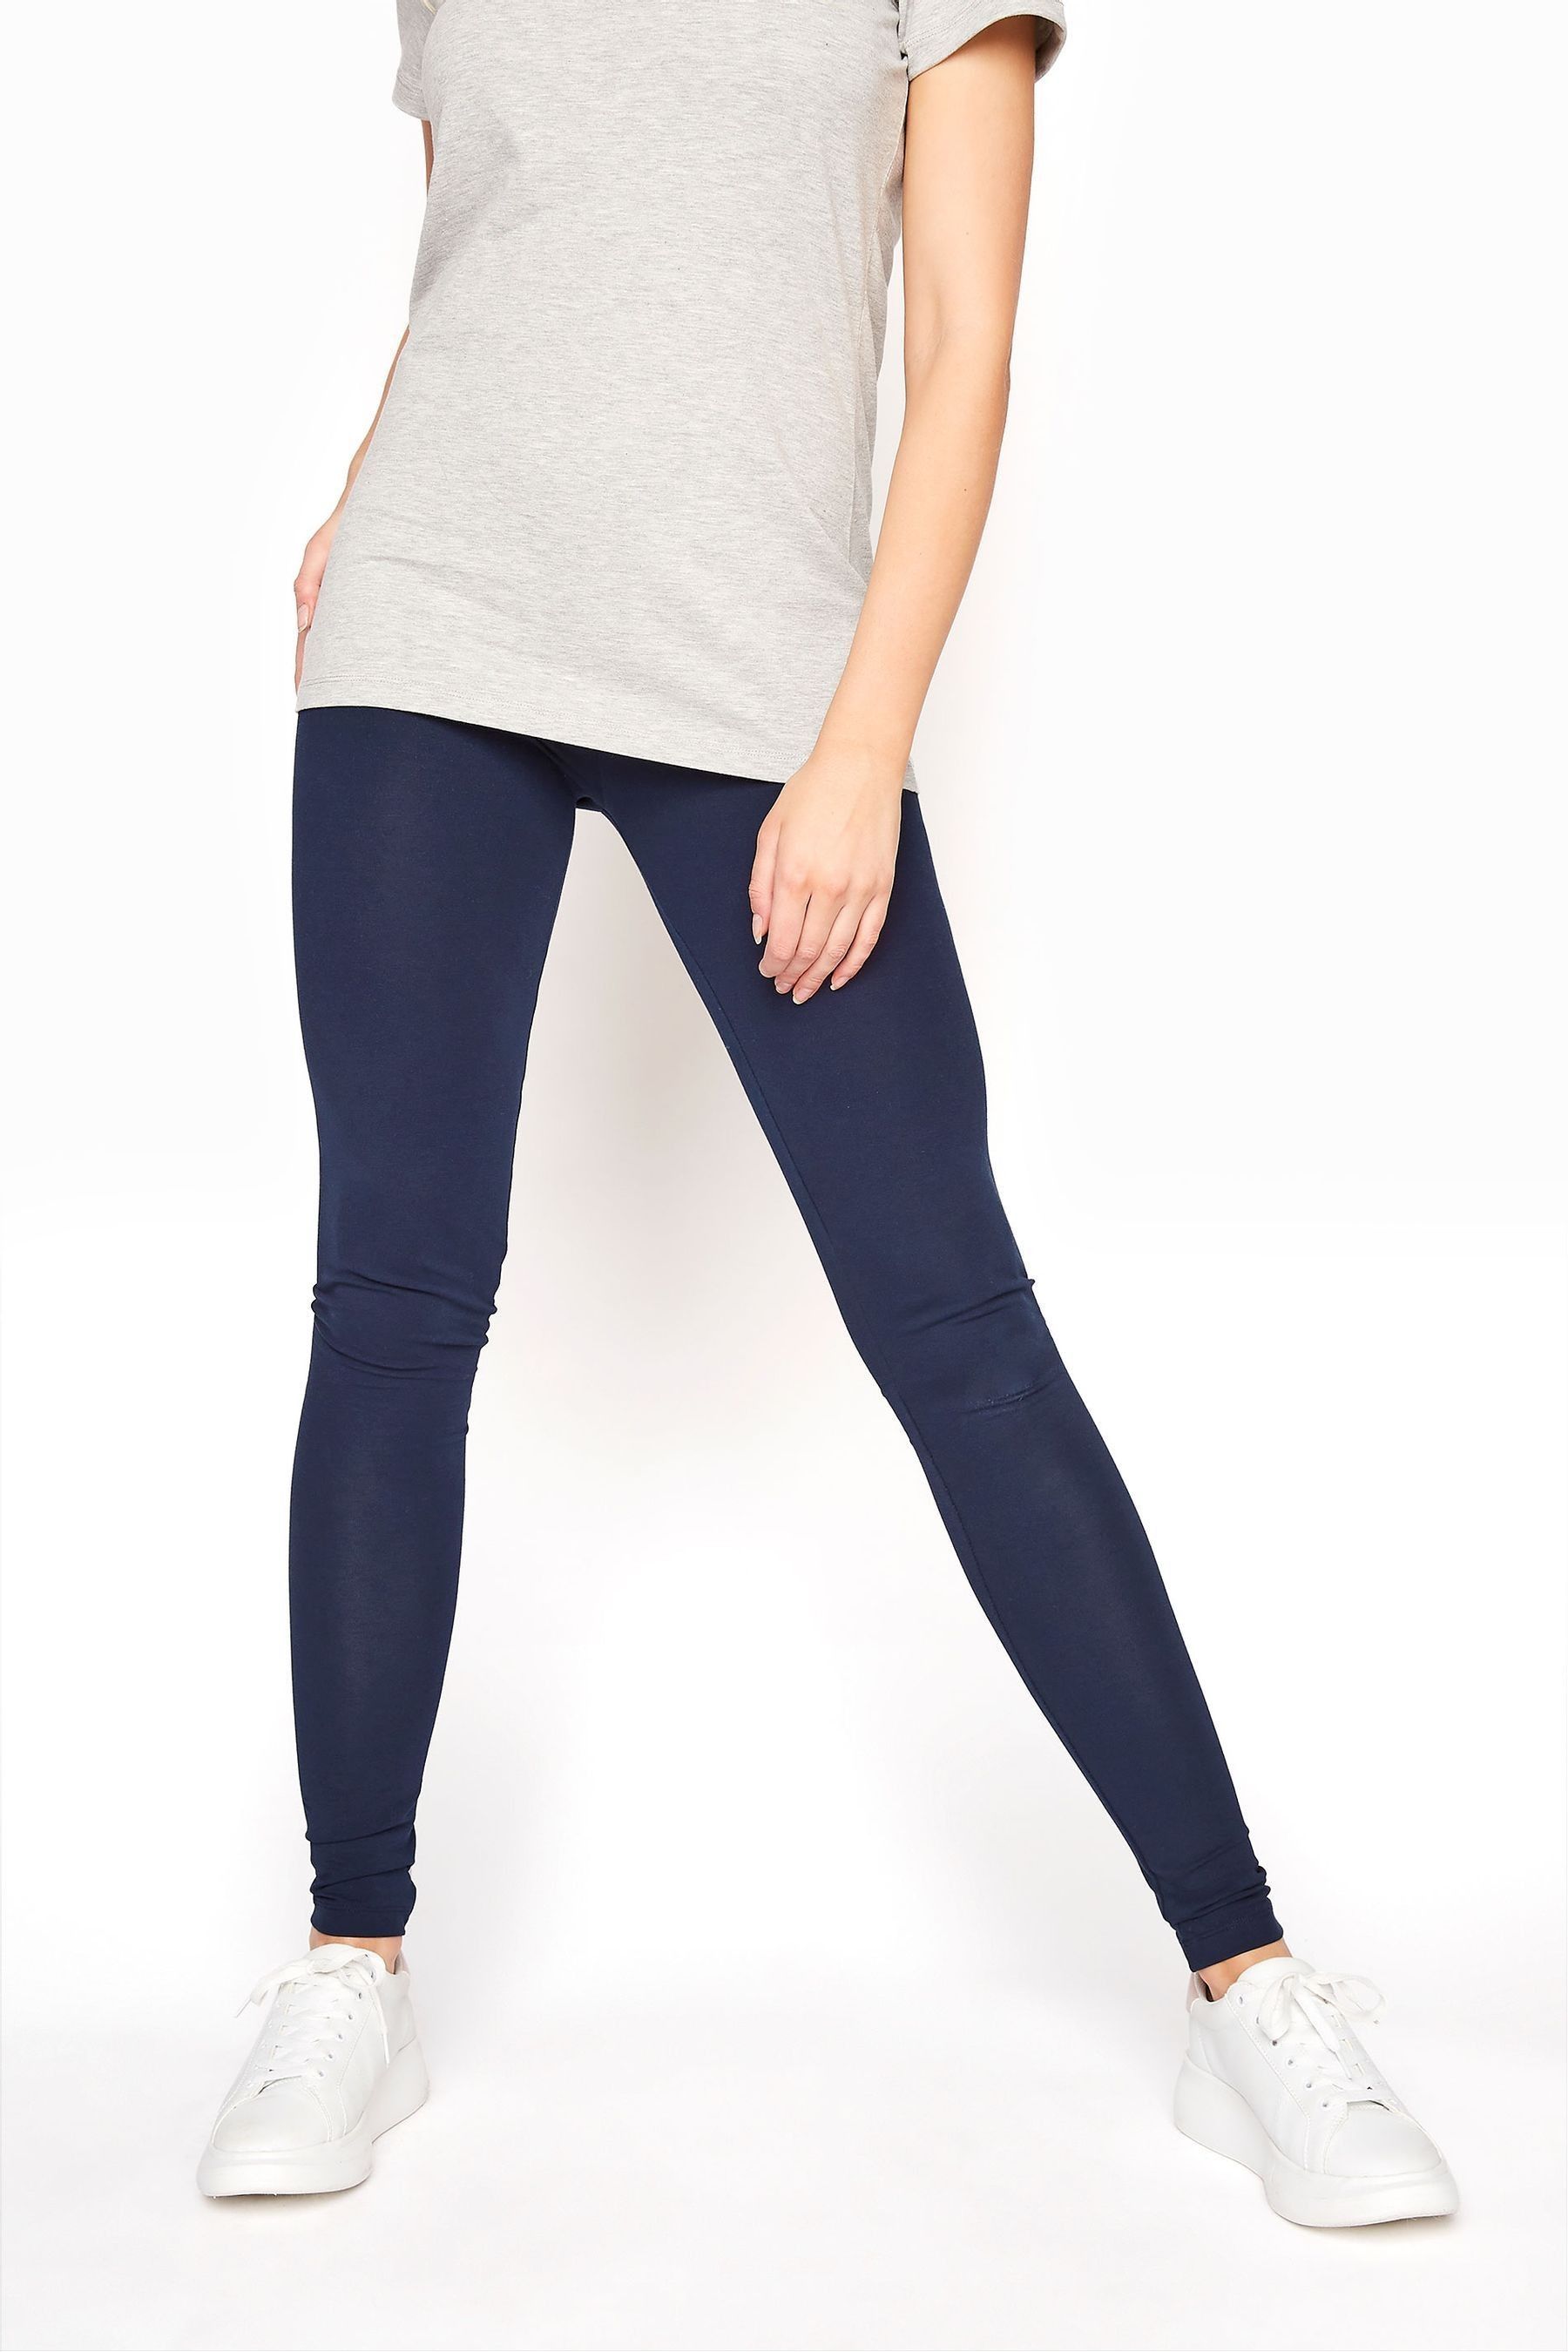 Leggings For Tall Ladies Uk  International Society of Precision Agriculture